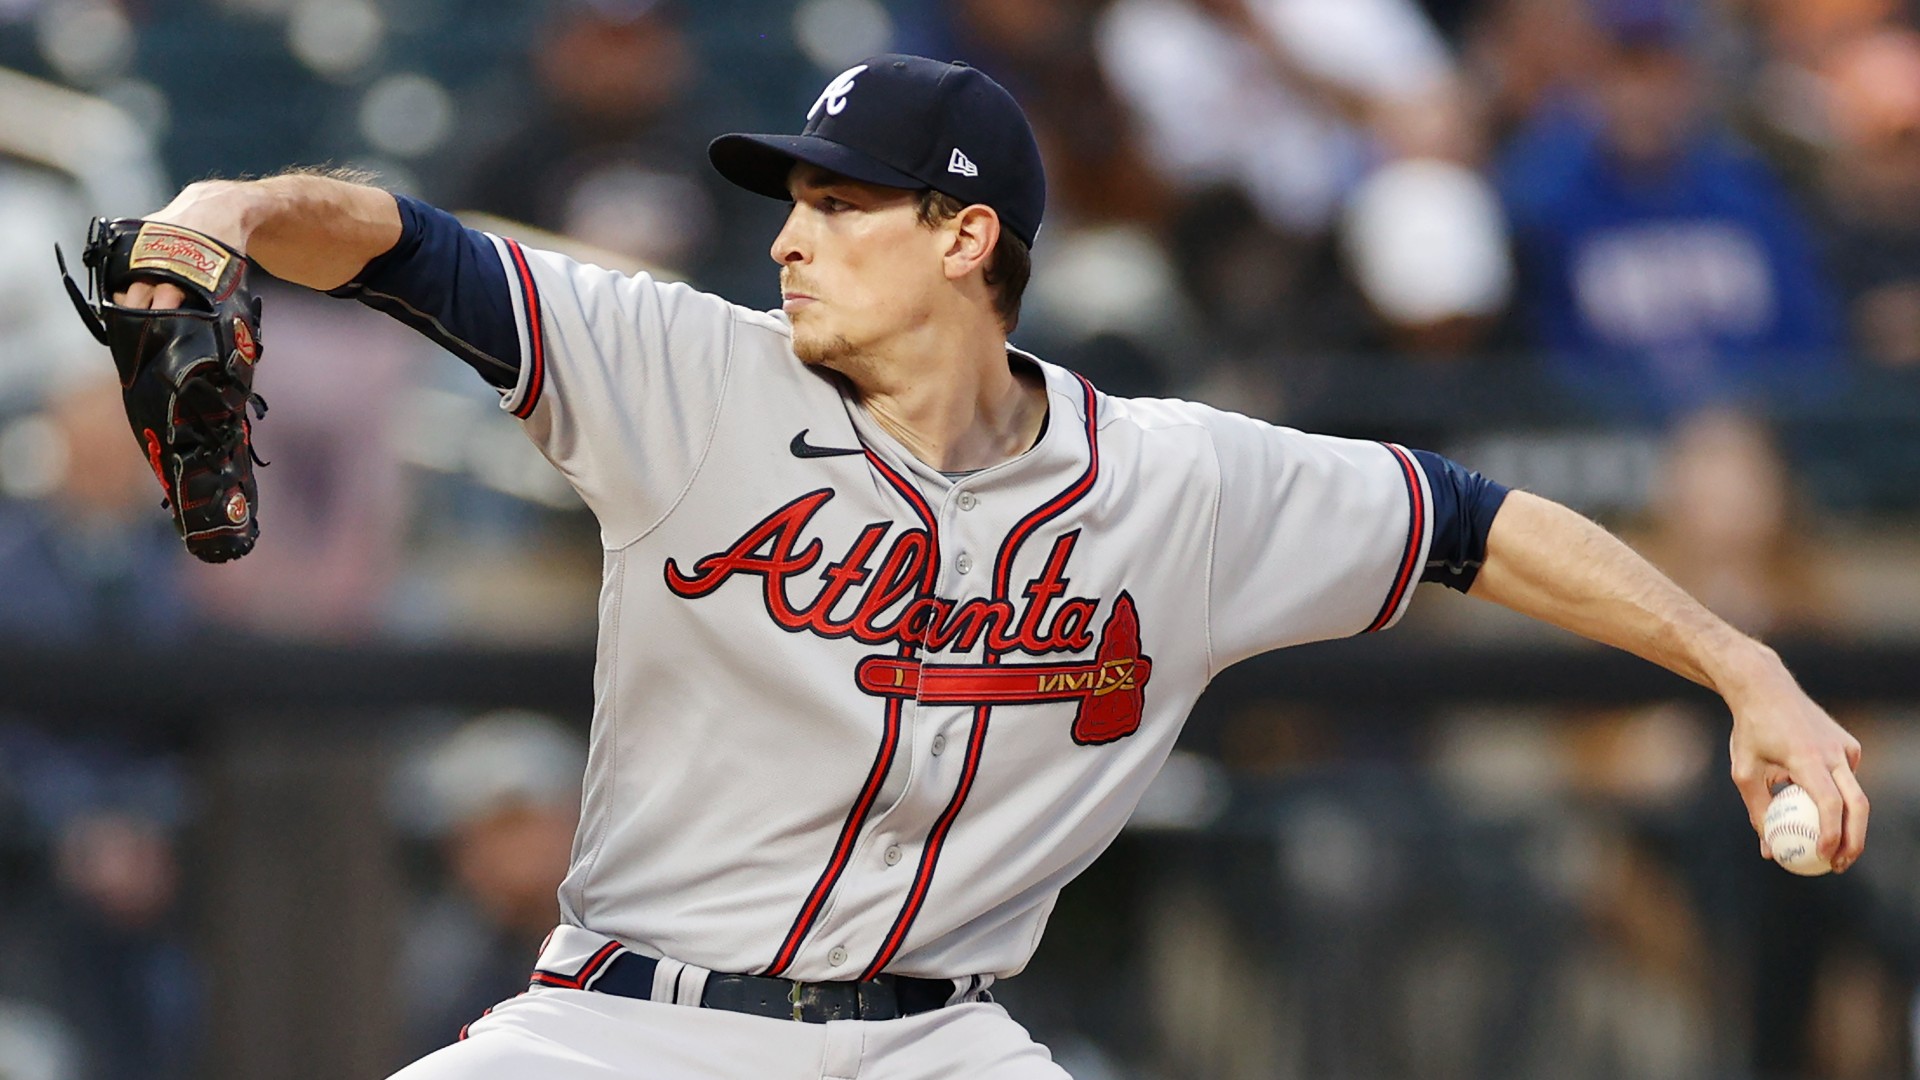 Brewers vs. Braves Odds, Picks, Predictions: Back Fried, Braves (May 7) article feature image